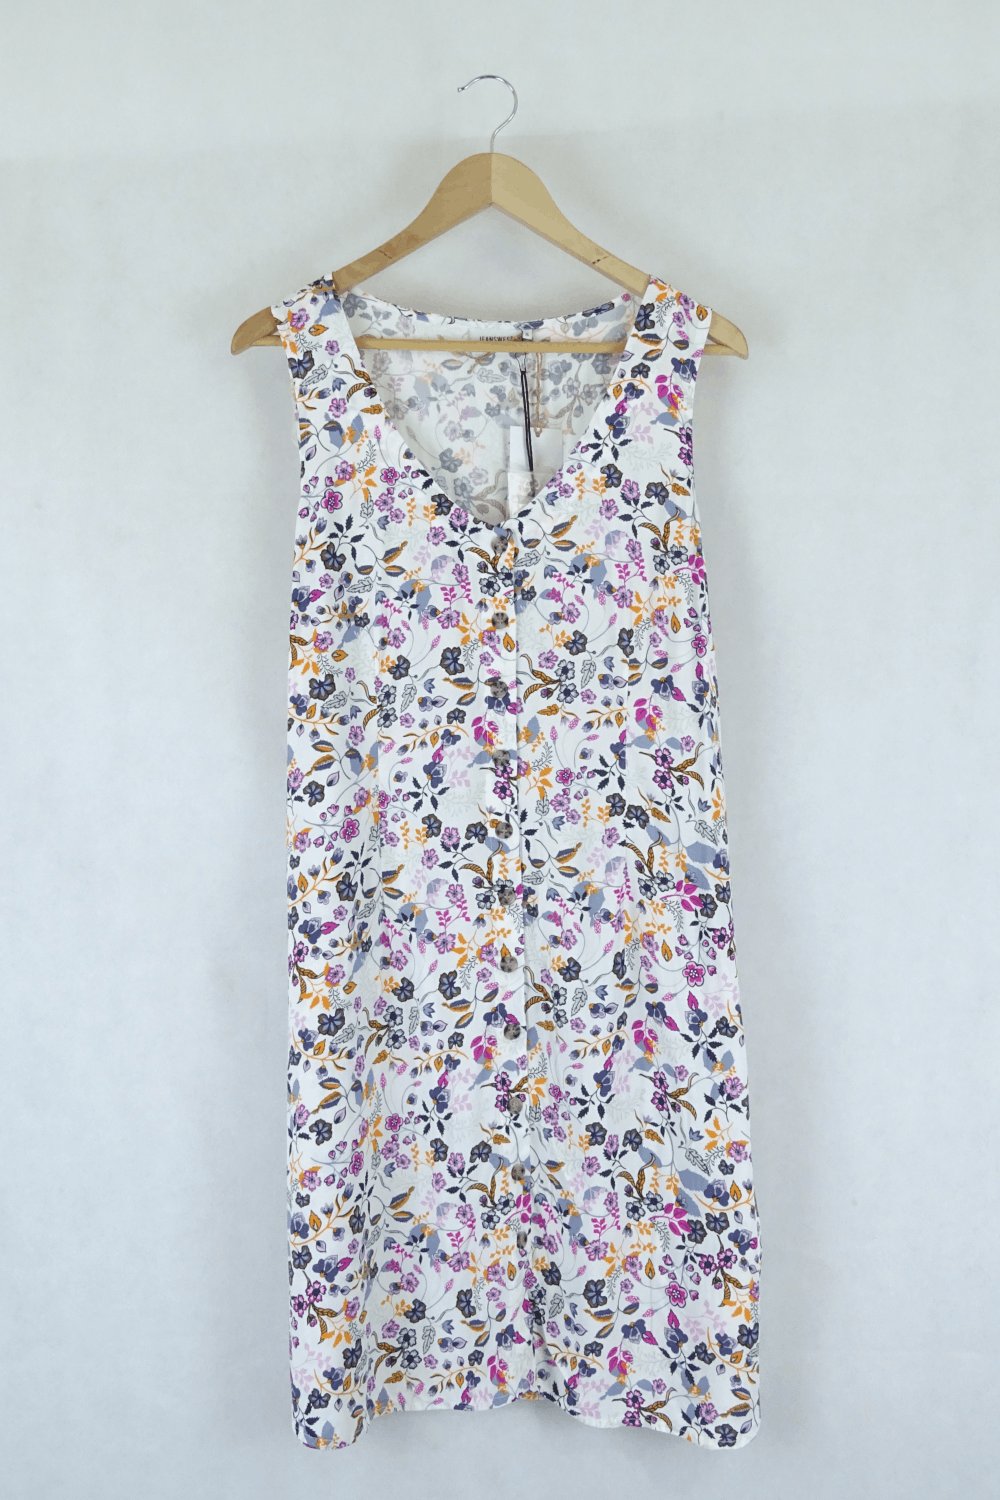 Jeanswest White Floral Dress 16